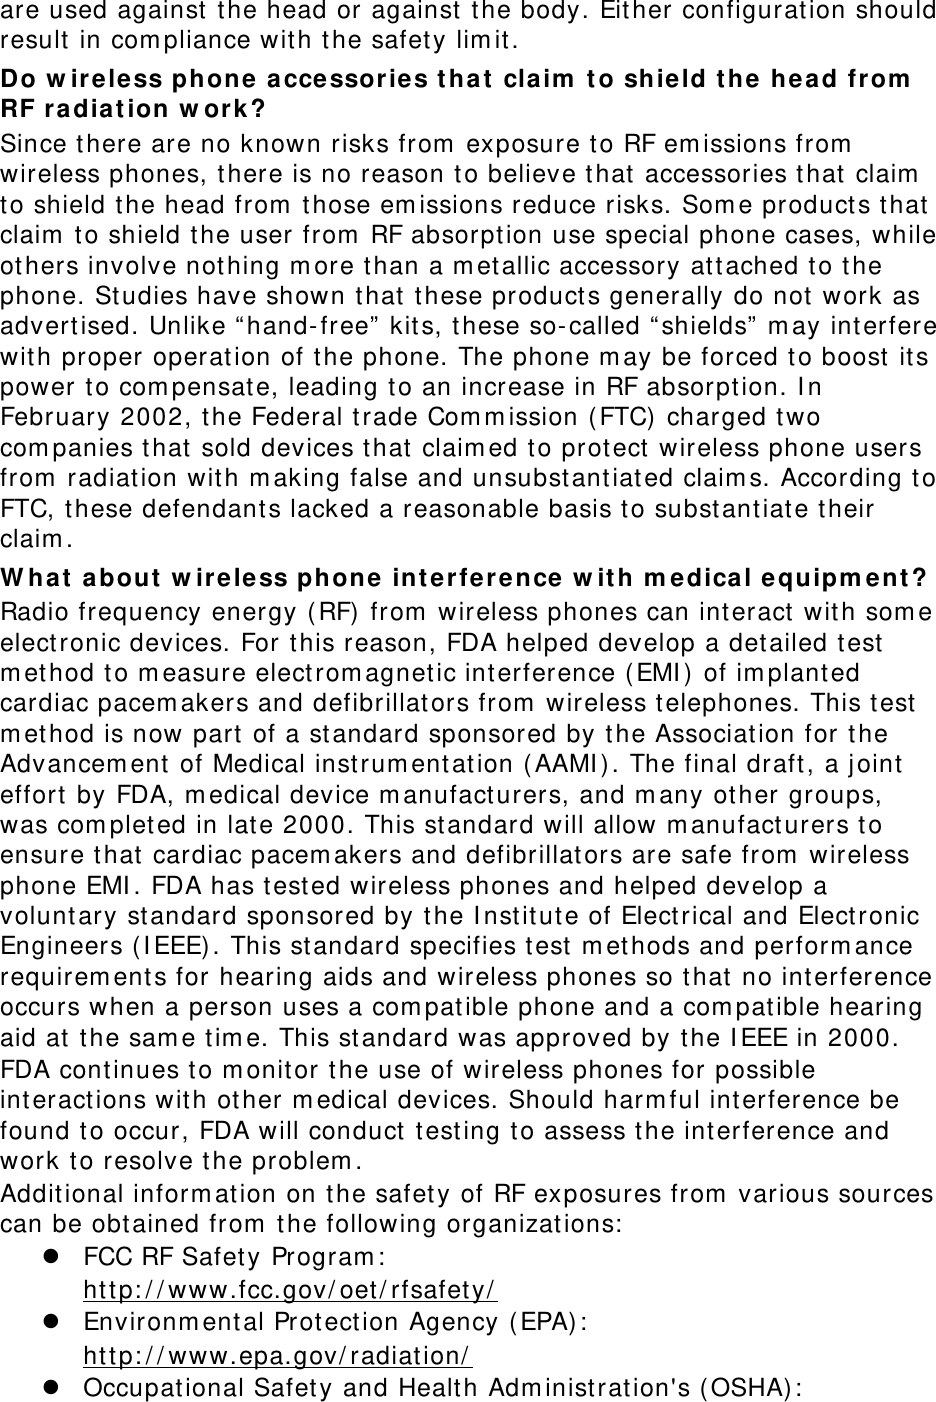 are used against the head or against the body. Either configuration should result in compliance with the safety limit. Do wireless phone accessories that claim to shield the head from RF radiation work? Since there are no known risks from exposure to RF emissions from wireless phones, there is no reason to believe that accessories that claim to shield the head from those emissions reduce risks. Some products that claim to shield the user from RF absorption use special phone cases, while others involve nothing more than a metallic accessory attached to the phone. Studies have shown that these products generally do not work as advertised. Unlike “hand-free” kits, these so-called “shields” may interfere with proper operation of the phone. The phone may be forced to boost its power to compensate, leading to an increase in RF absorption. In February 2002, the Federal trade Commission (FTC) charged two companies that sold devices that claimed to protect wireless phone users from radiation with making false and unsubstantiated claims. According to FTC, these defendants lacked a reasonable basis to substantiate their claim. What about wireless phone interference with medical equipment? Radio frequency energy (RF) from wireless phones can interact with some electronic devices. For this reason, FDA helped develop a detailed test method to measure electromagnetic interference (EMI) of implanted cardiac pacemakers and defibrillators from wireless telephones. This test method is now part of a standard sponsored by the Association for the Advancement of Medical instrumentation (AAMI). The final draft, a joint effort by FDA, medical device manufacturers, and many other groups, was completed in late 2000. This standard will allow manufacturers to ensure that cardiac pacemakers and defibrillators are safe from wireless phone EMI. FDA has tested wireless phones and helped develop a voluntary standard sponsored by the Institute of Electrical and Electronic Engineers (IEEE). This standard specifies test methods and performance requirements for hearing aids and wireless phones so that no interference occurs when a person uses a compatible phone and a compatible hearing aid at the same time. This standard was approved by the IEEE in 2000. FDA continues to monitor the use of wireless phones for possible interactions with other medical devices. Should harmful interference be found to occur, FDA will conduct testing to assess the interference and work to resolve the problem. Additional information on the safety of RF exposures from various sources can be obtained from the following organizations:  FCC RF Safety Program:  http://www.fcc.gov/oet/rfsafety/  Environmental Protection Agency (EPA):  http://www.epa.gov/radiation/  Occupational Safety and Health Administration&apos;s (OSHA):  